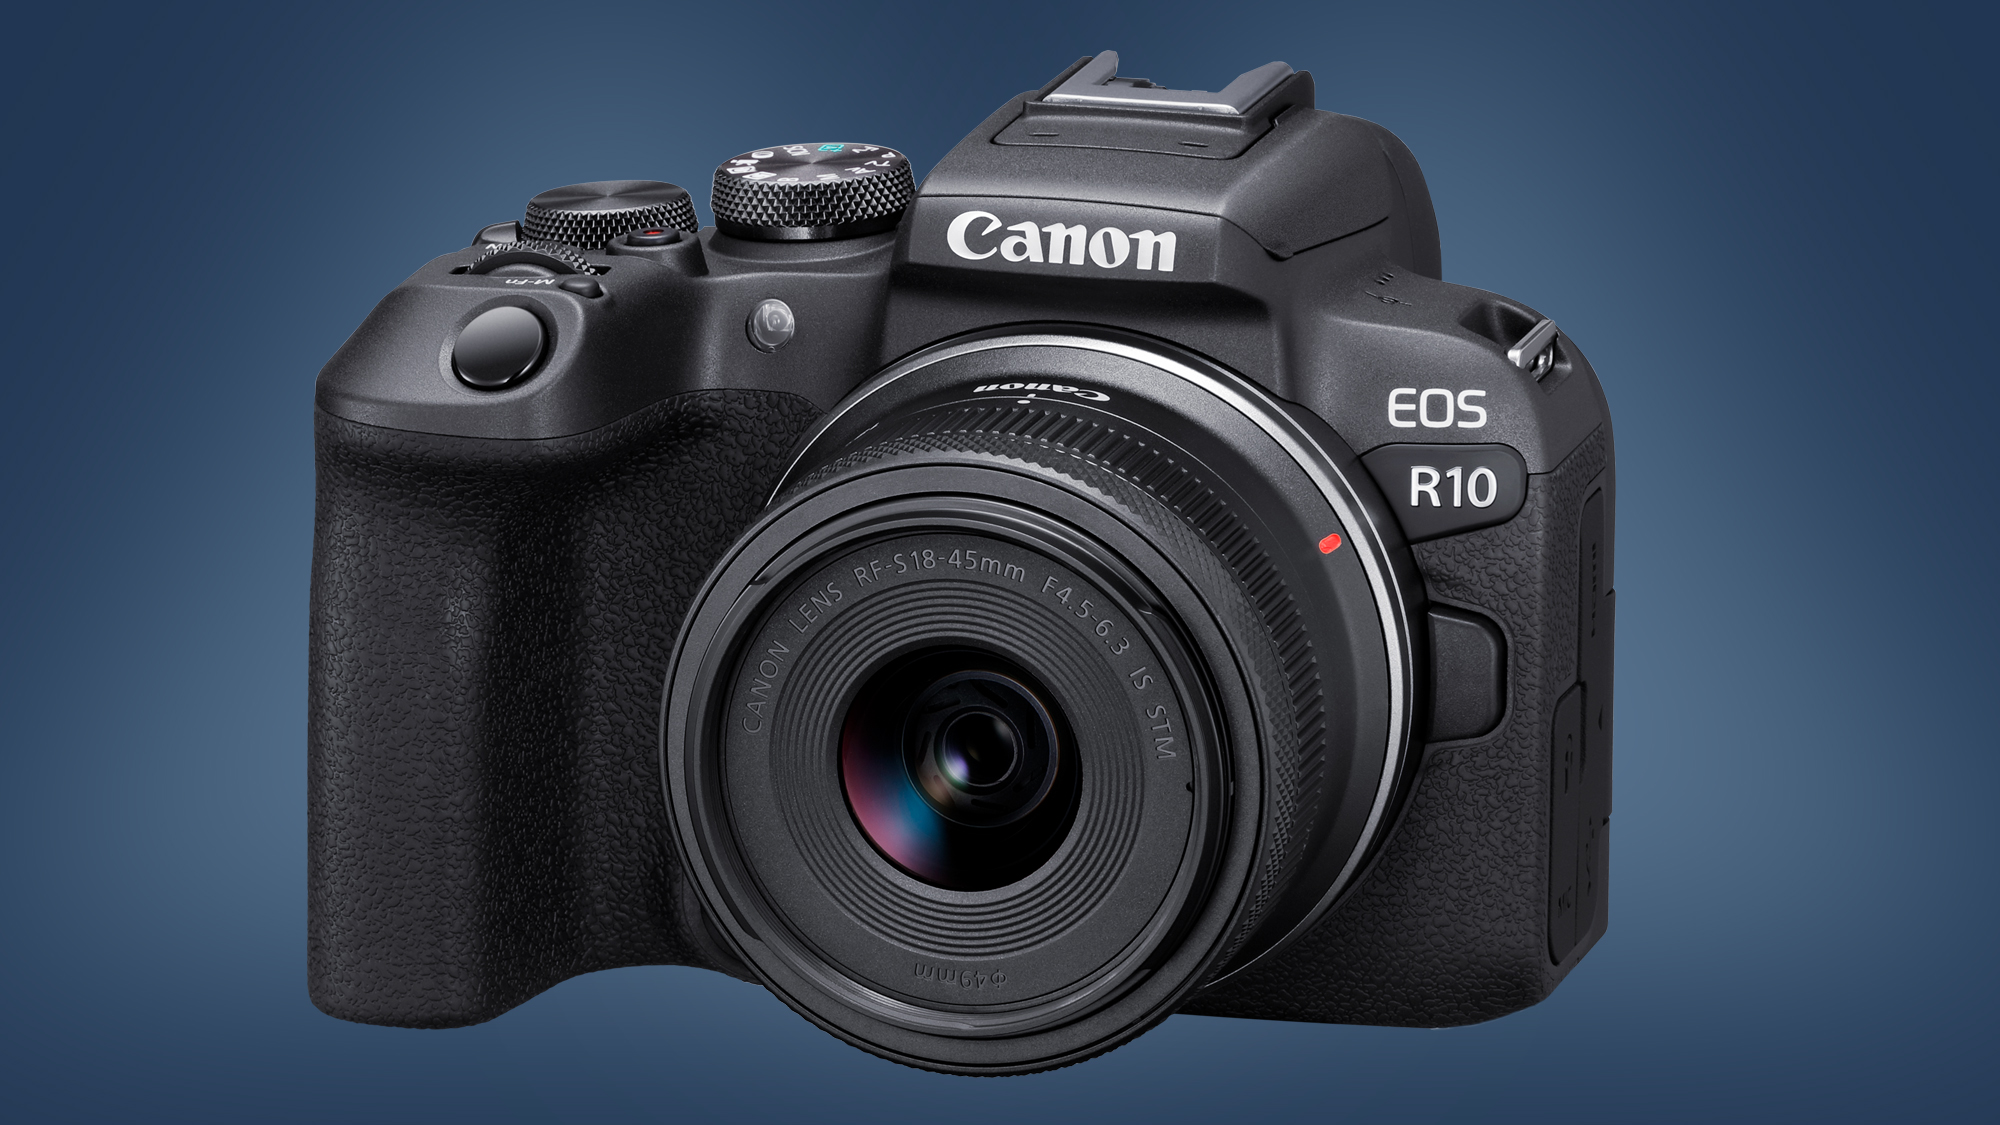 Canon EOS R10 camera on a blue background